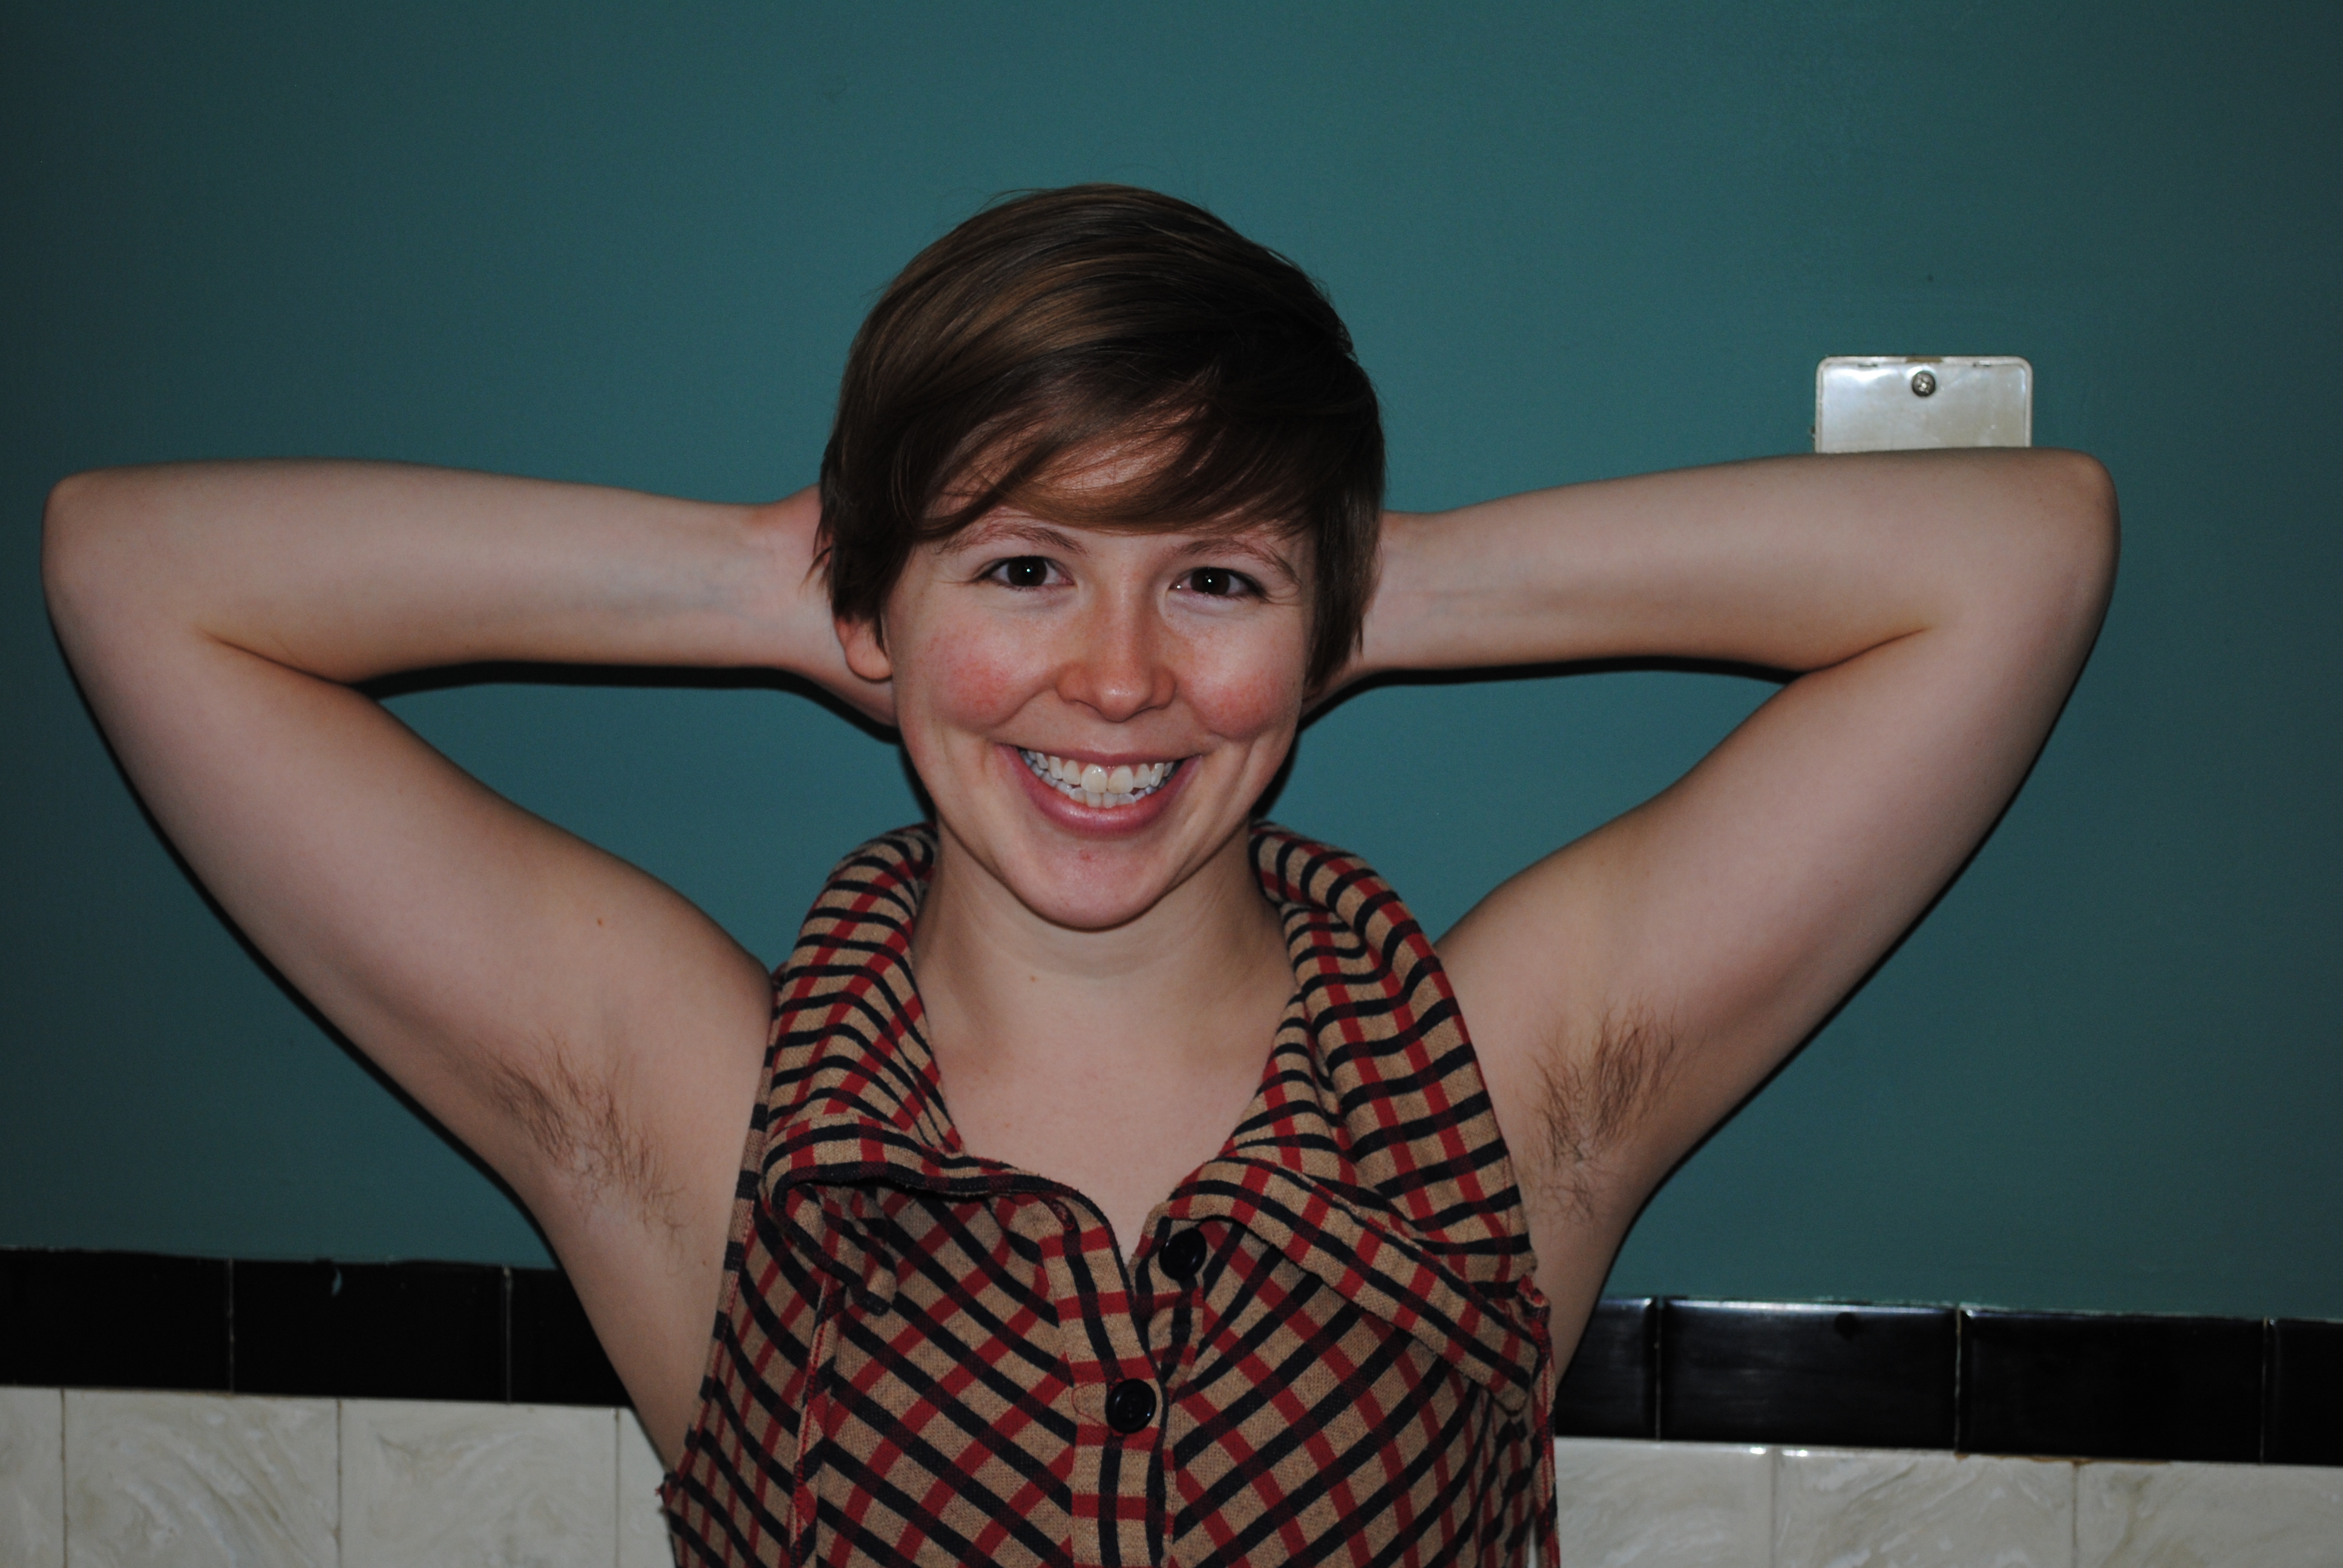 40 HQ Pictures Armpit Hair Stages / 3 Stages Of Hair Growth Why They Matter For Laser Hair Removal